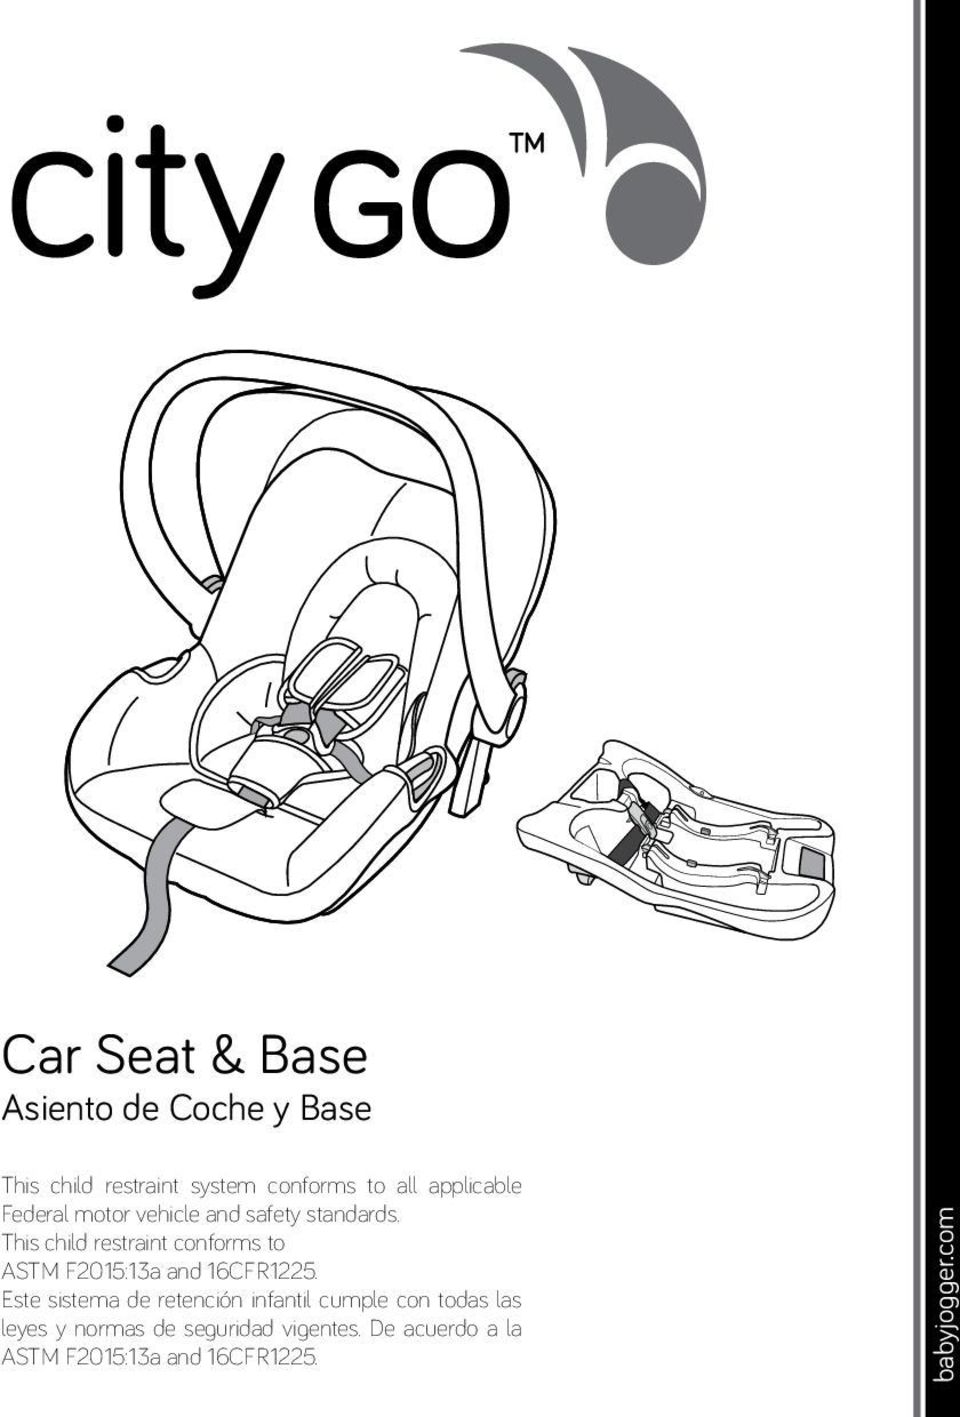 This child restraint conforms to ASTM F05:3a and 6CFR5.